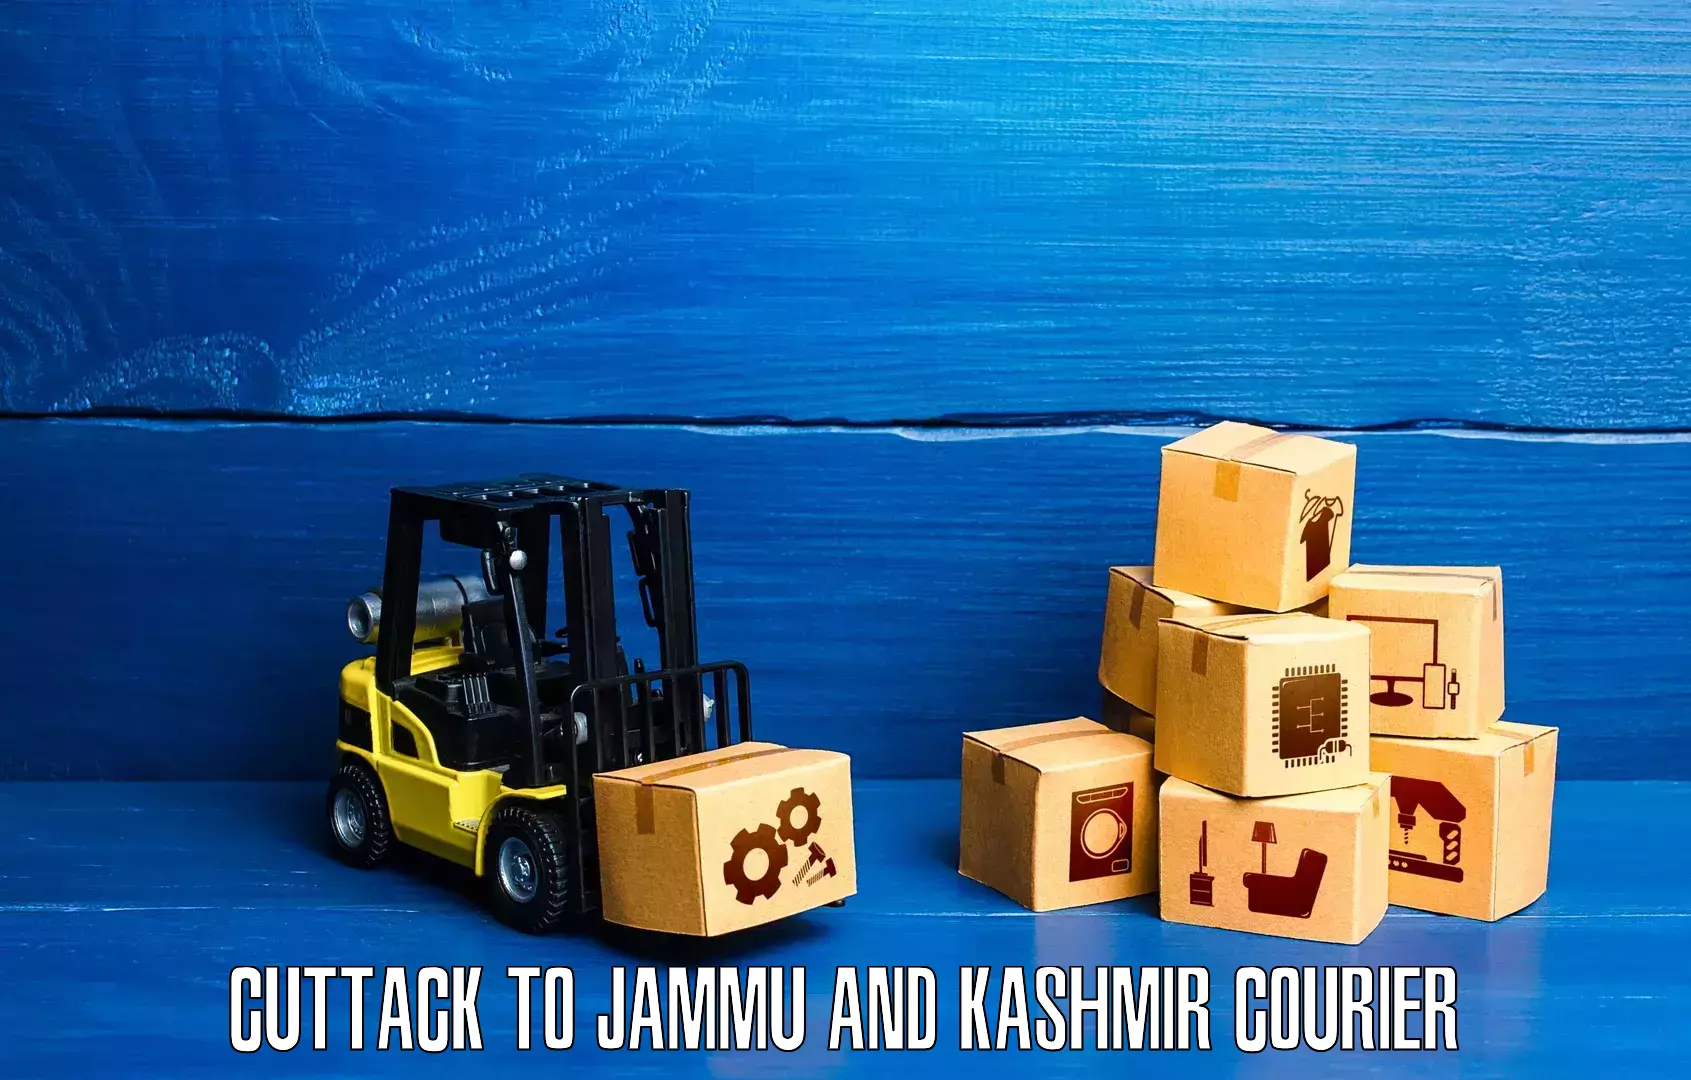 Doorstep delivery service Cuttack to Jammu and Kashmir